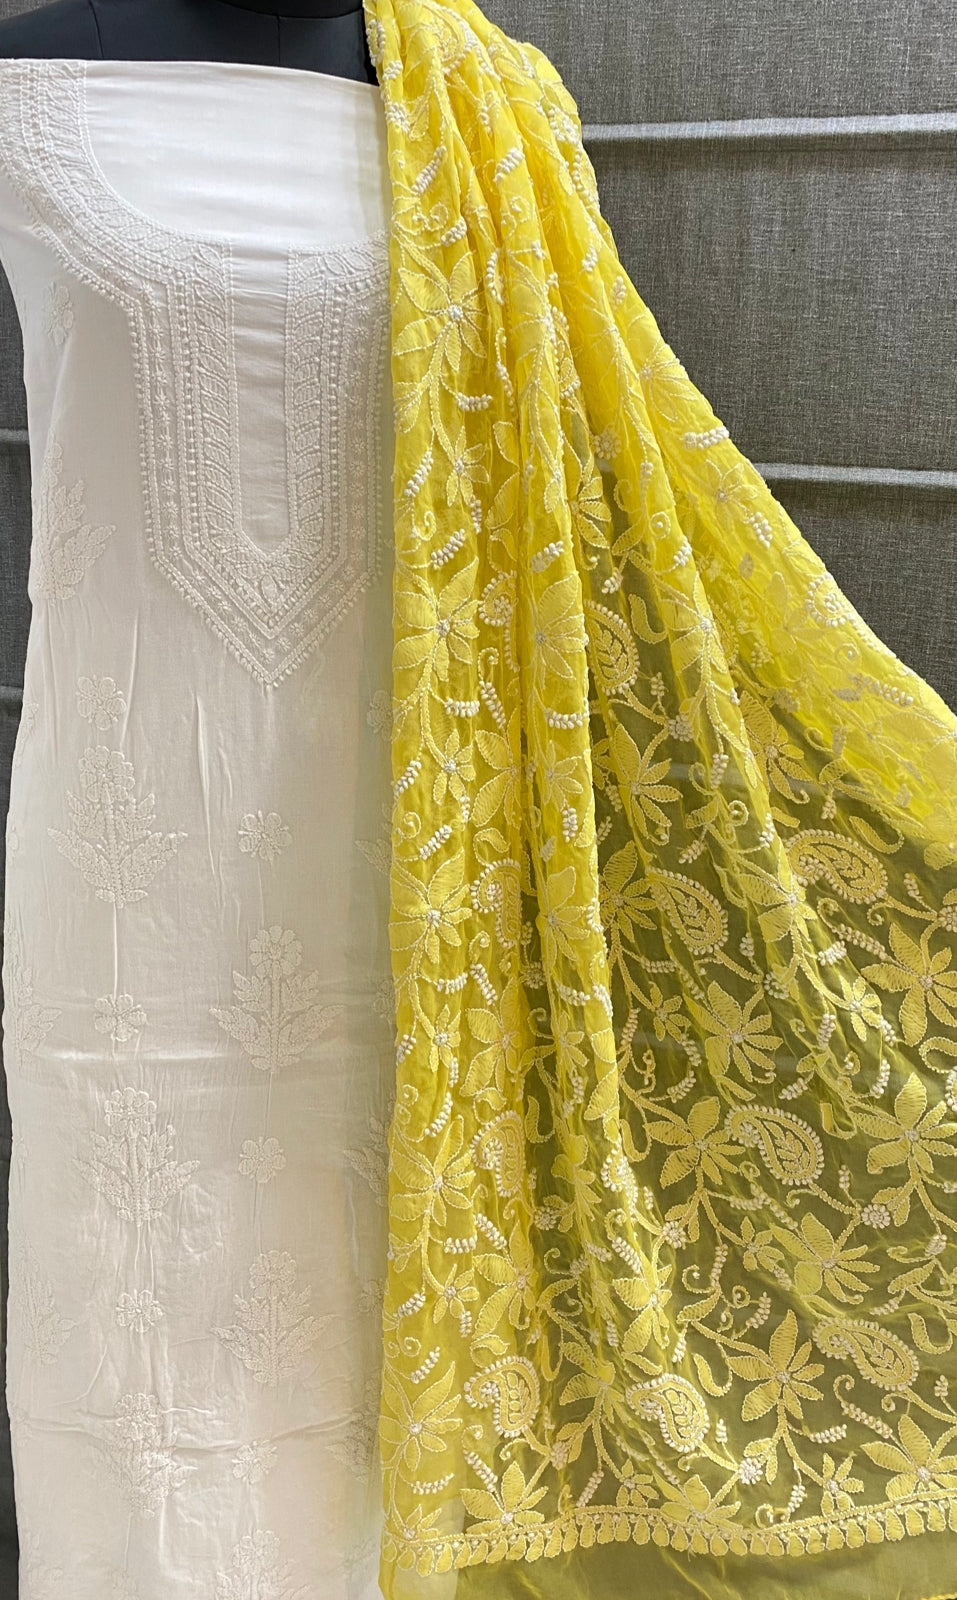 Chanderi Embroidered Suit: Off-White Suit With Mulmul Cotton Dupatta |  Kalasheel